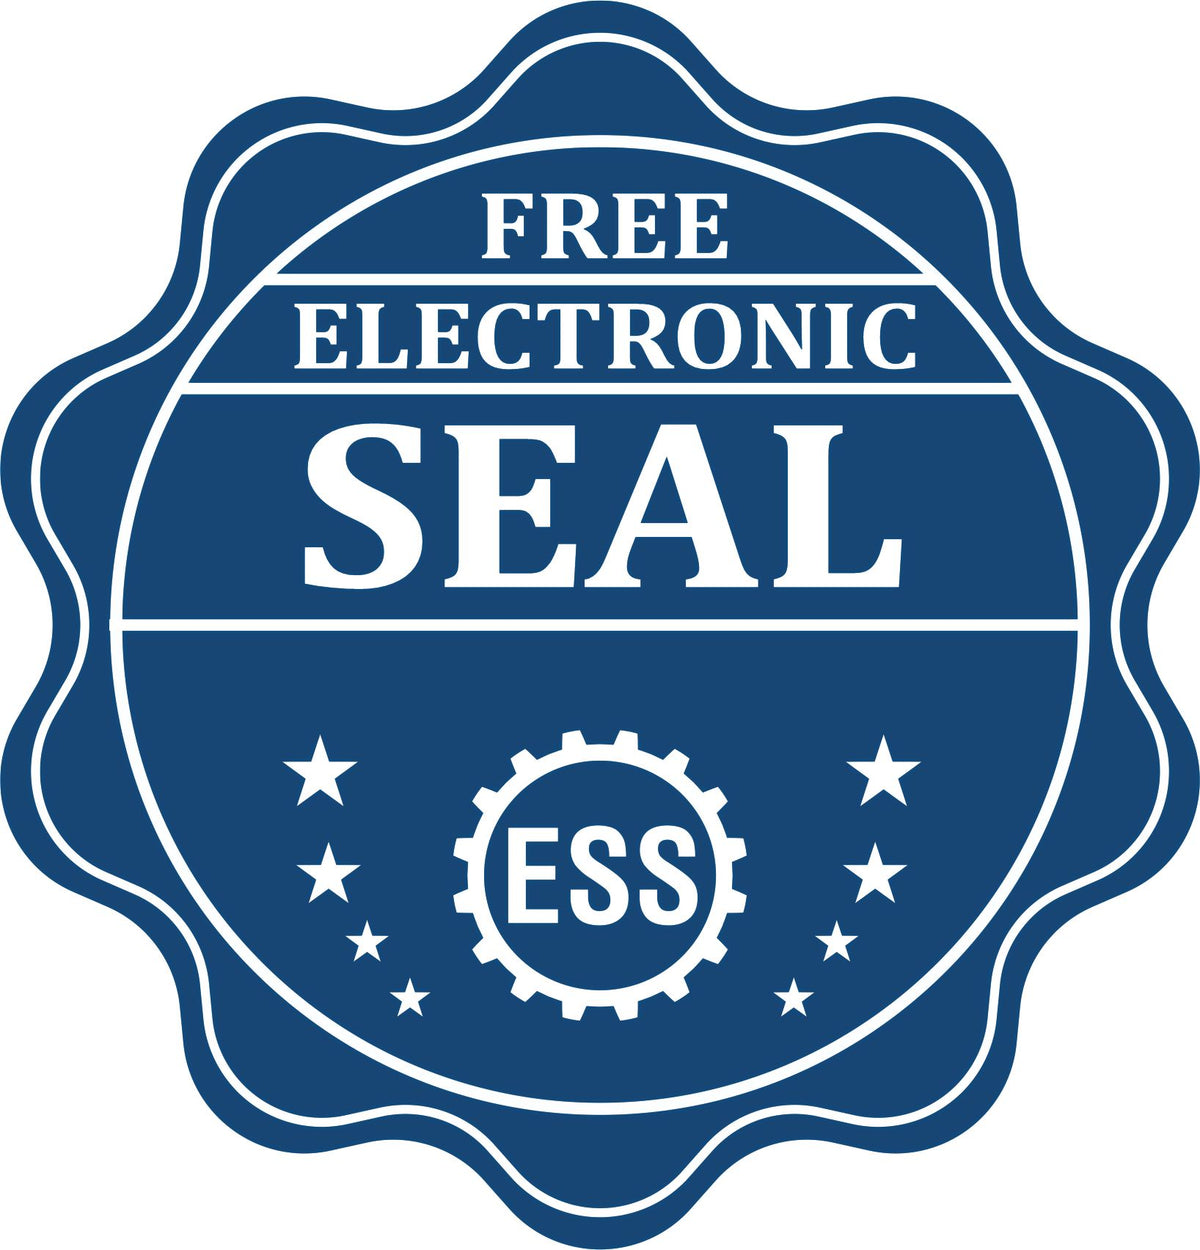 A badge showing a free electronic seal for the Handheld Connecticut Architect Seal Embosser with stars and the ESS gear on the emblem.